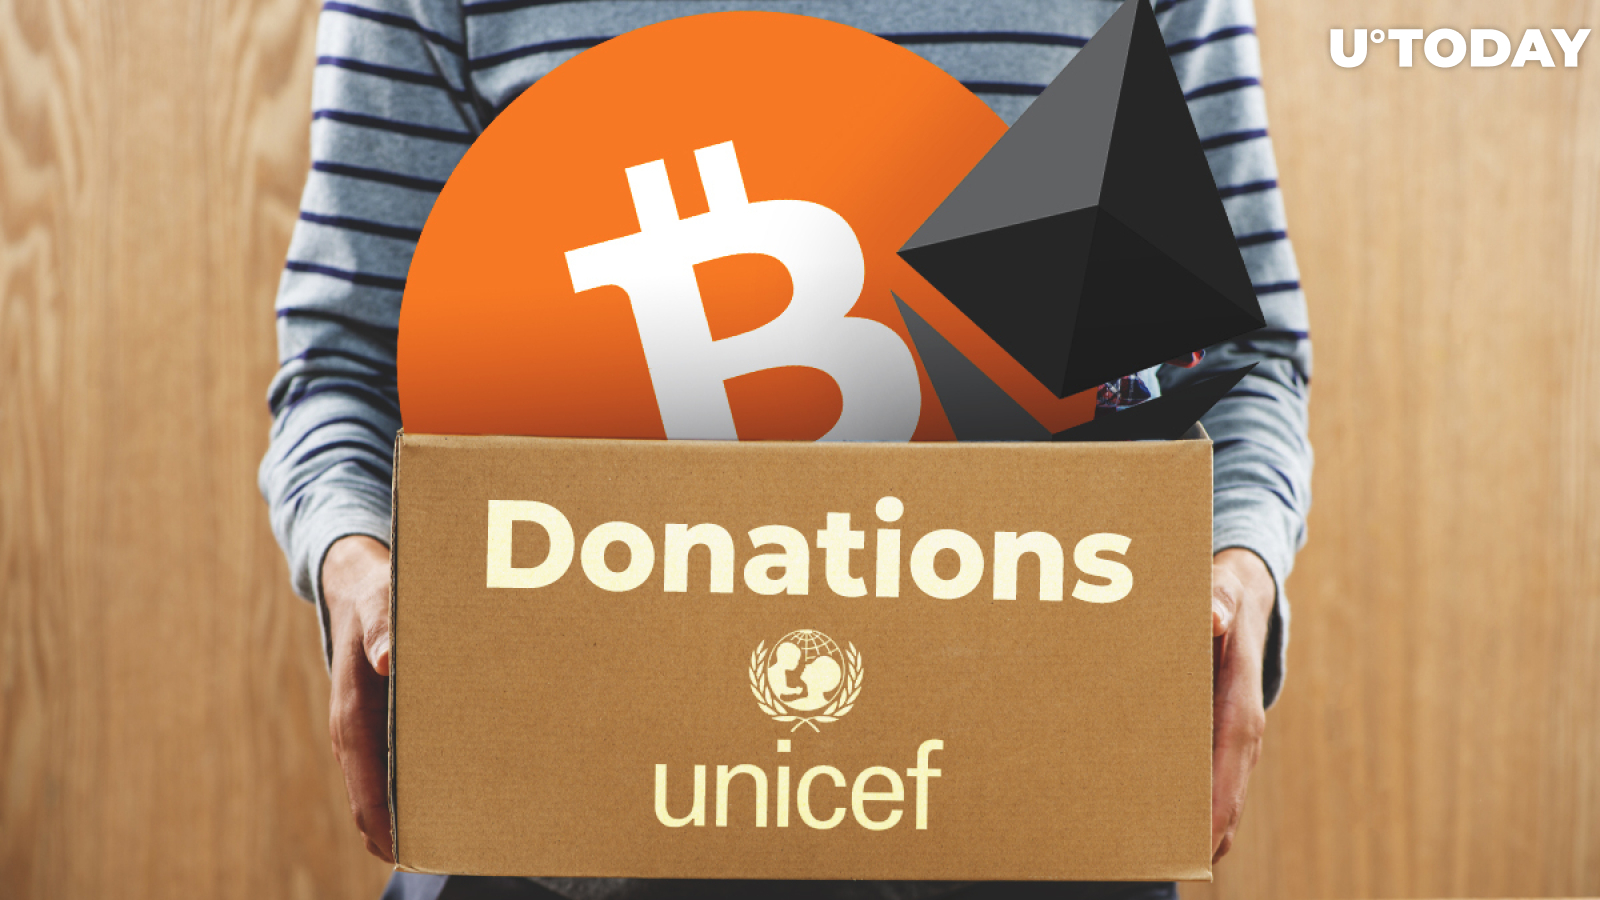 Bitcoin and Ethereum Donations Now Accepted by UNICEF Through Its Newly-Established Crypto Fund